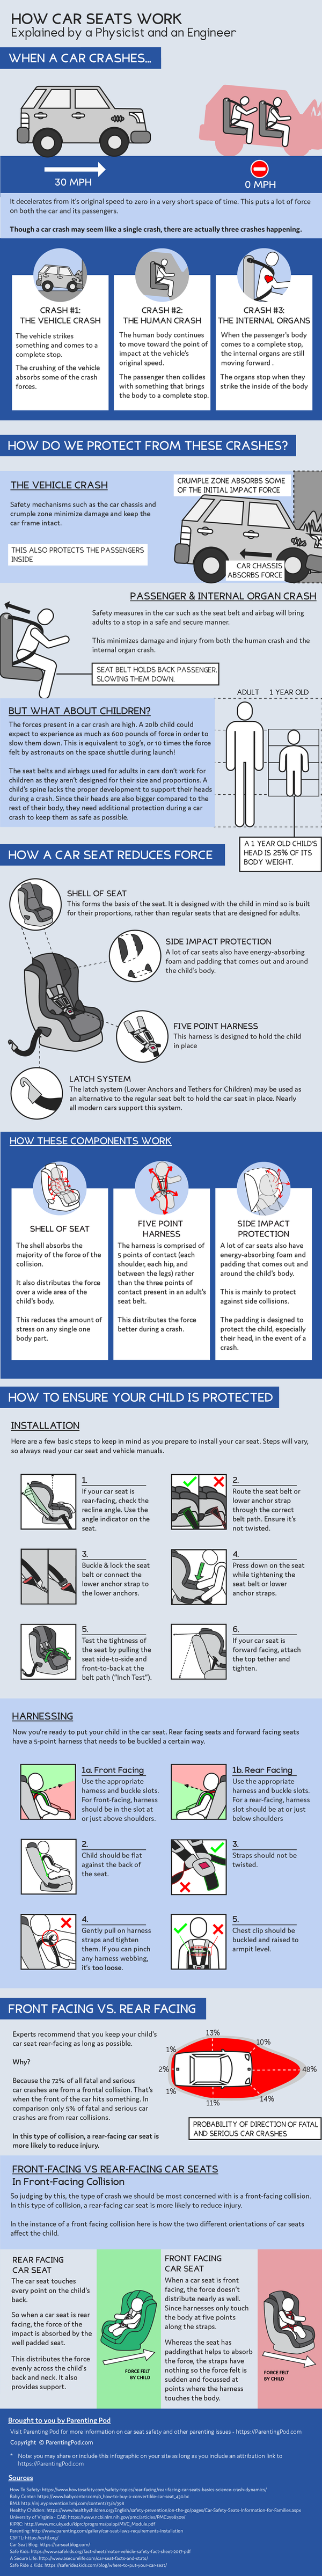 Lets-Talk-Car-Seats-why-Its-Important-Keep-Littles-Rear-Facing.png